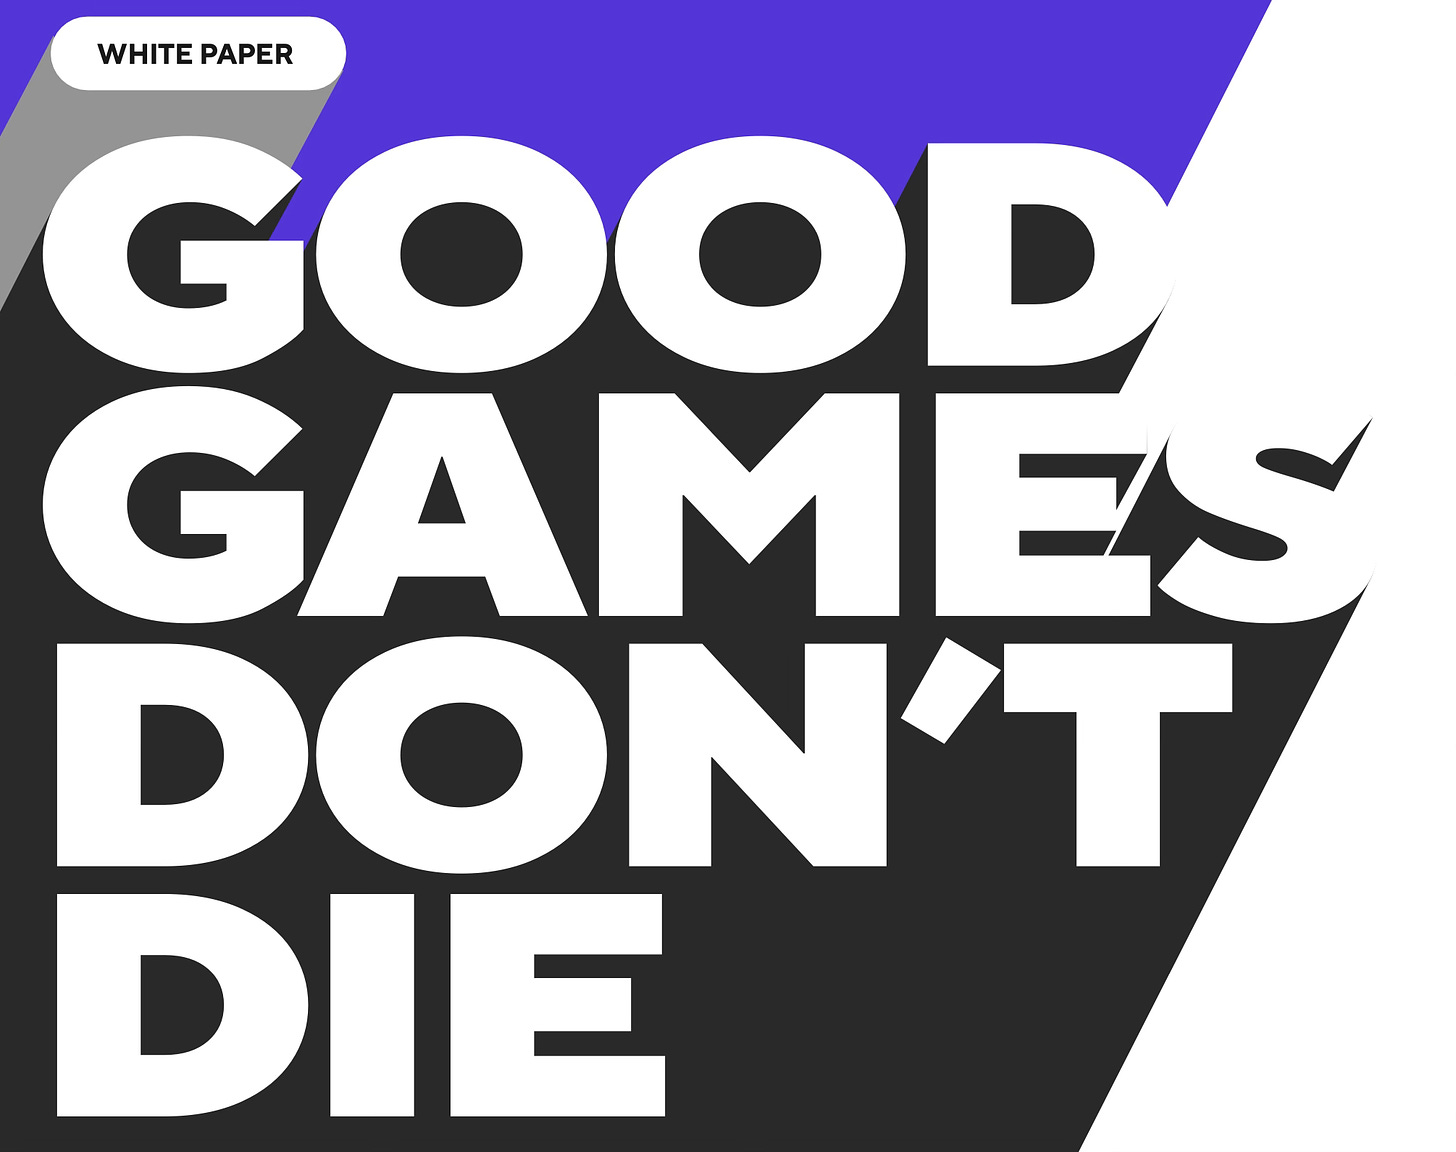 Launched games die